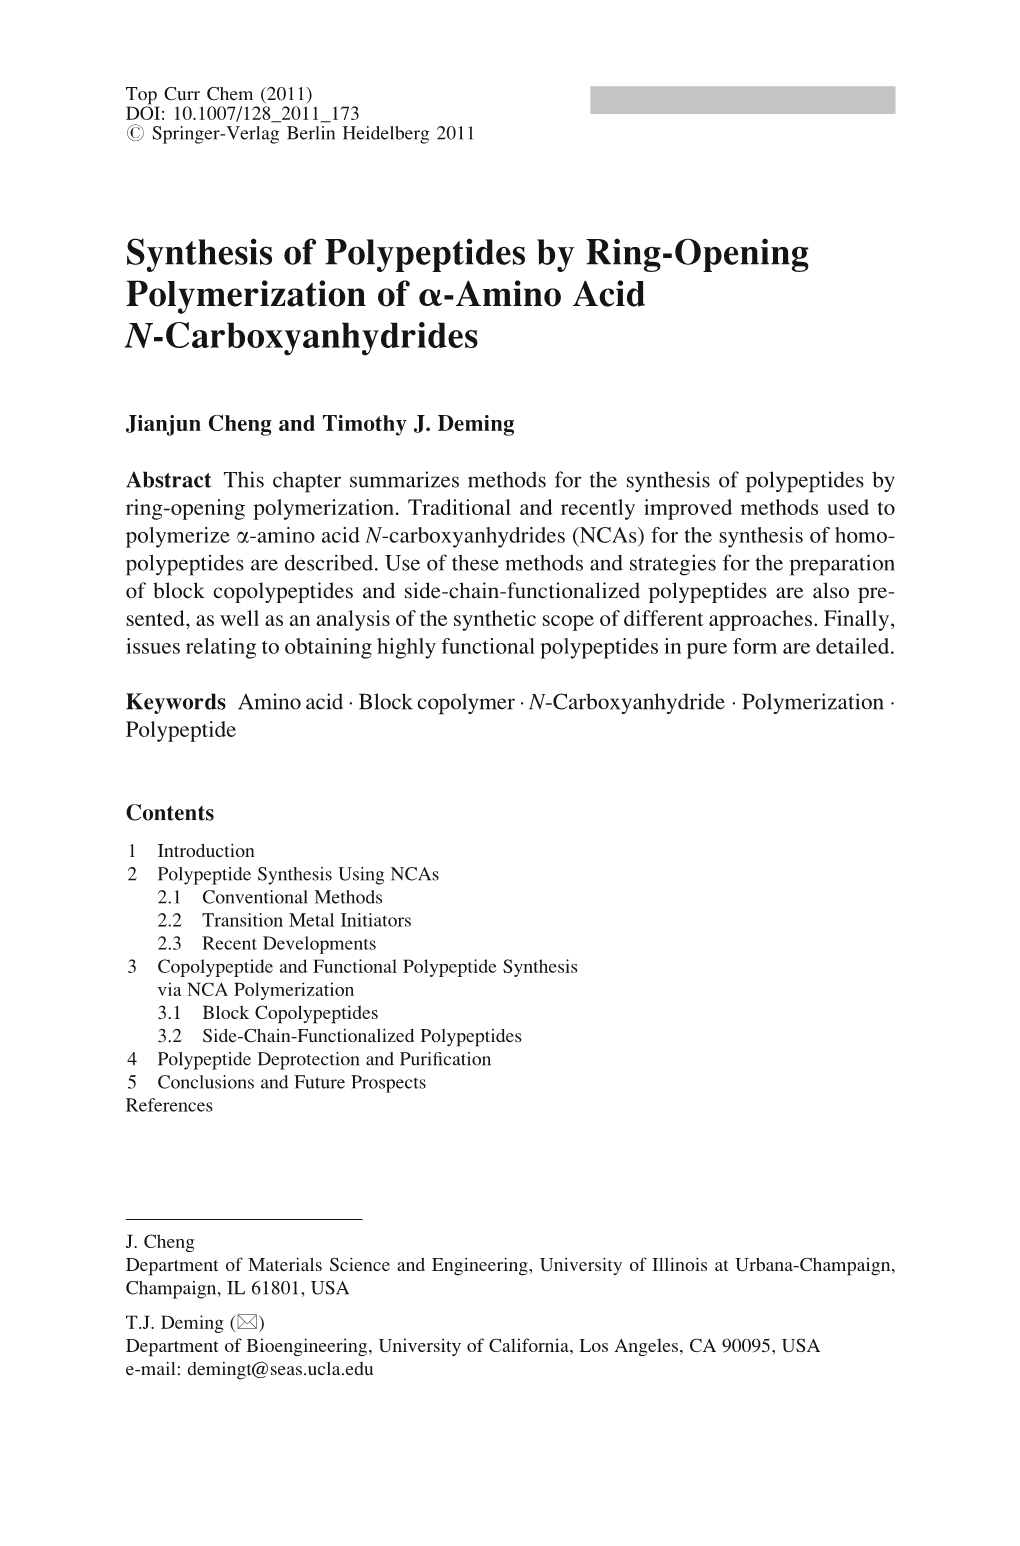 Synthesis of Polypeptides by Ring-Opening Polymerization of A-Amino Acid N-Carboxyanhydrides